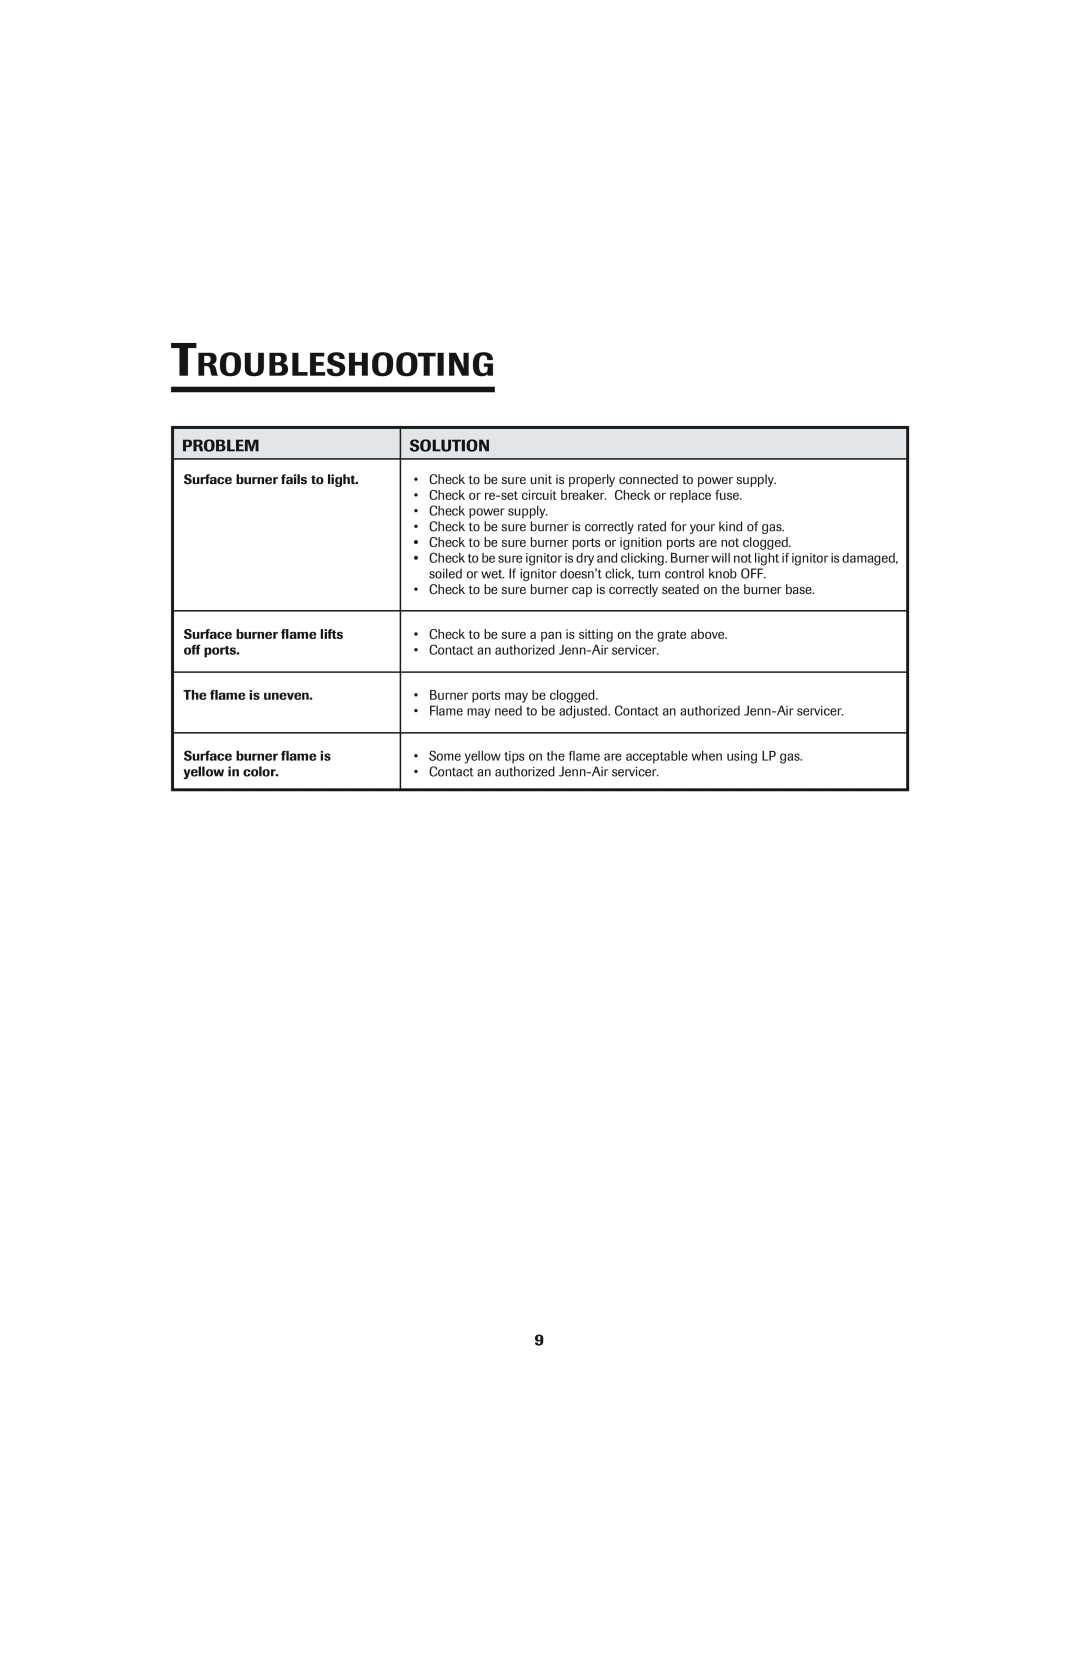 Jenn-Air 8112P342-60 important safety instructions T Roubleshooting, Problem, Solution 